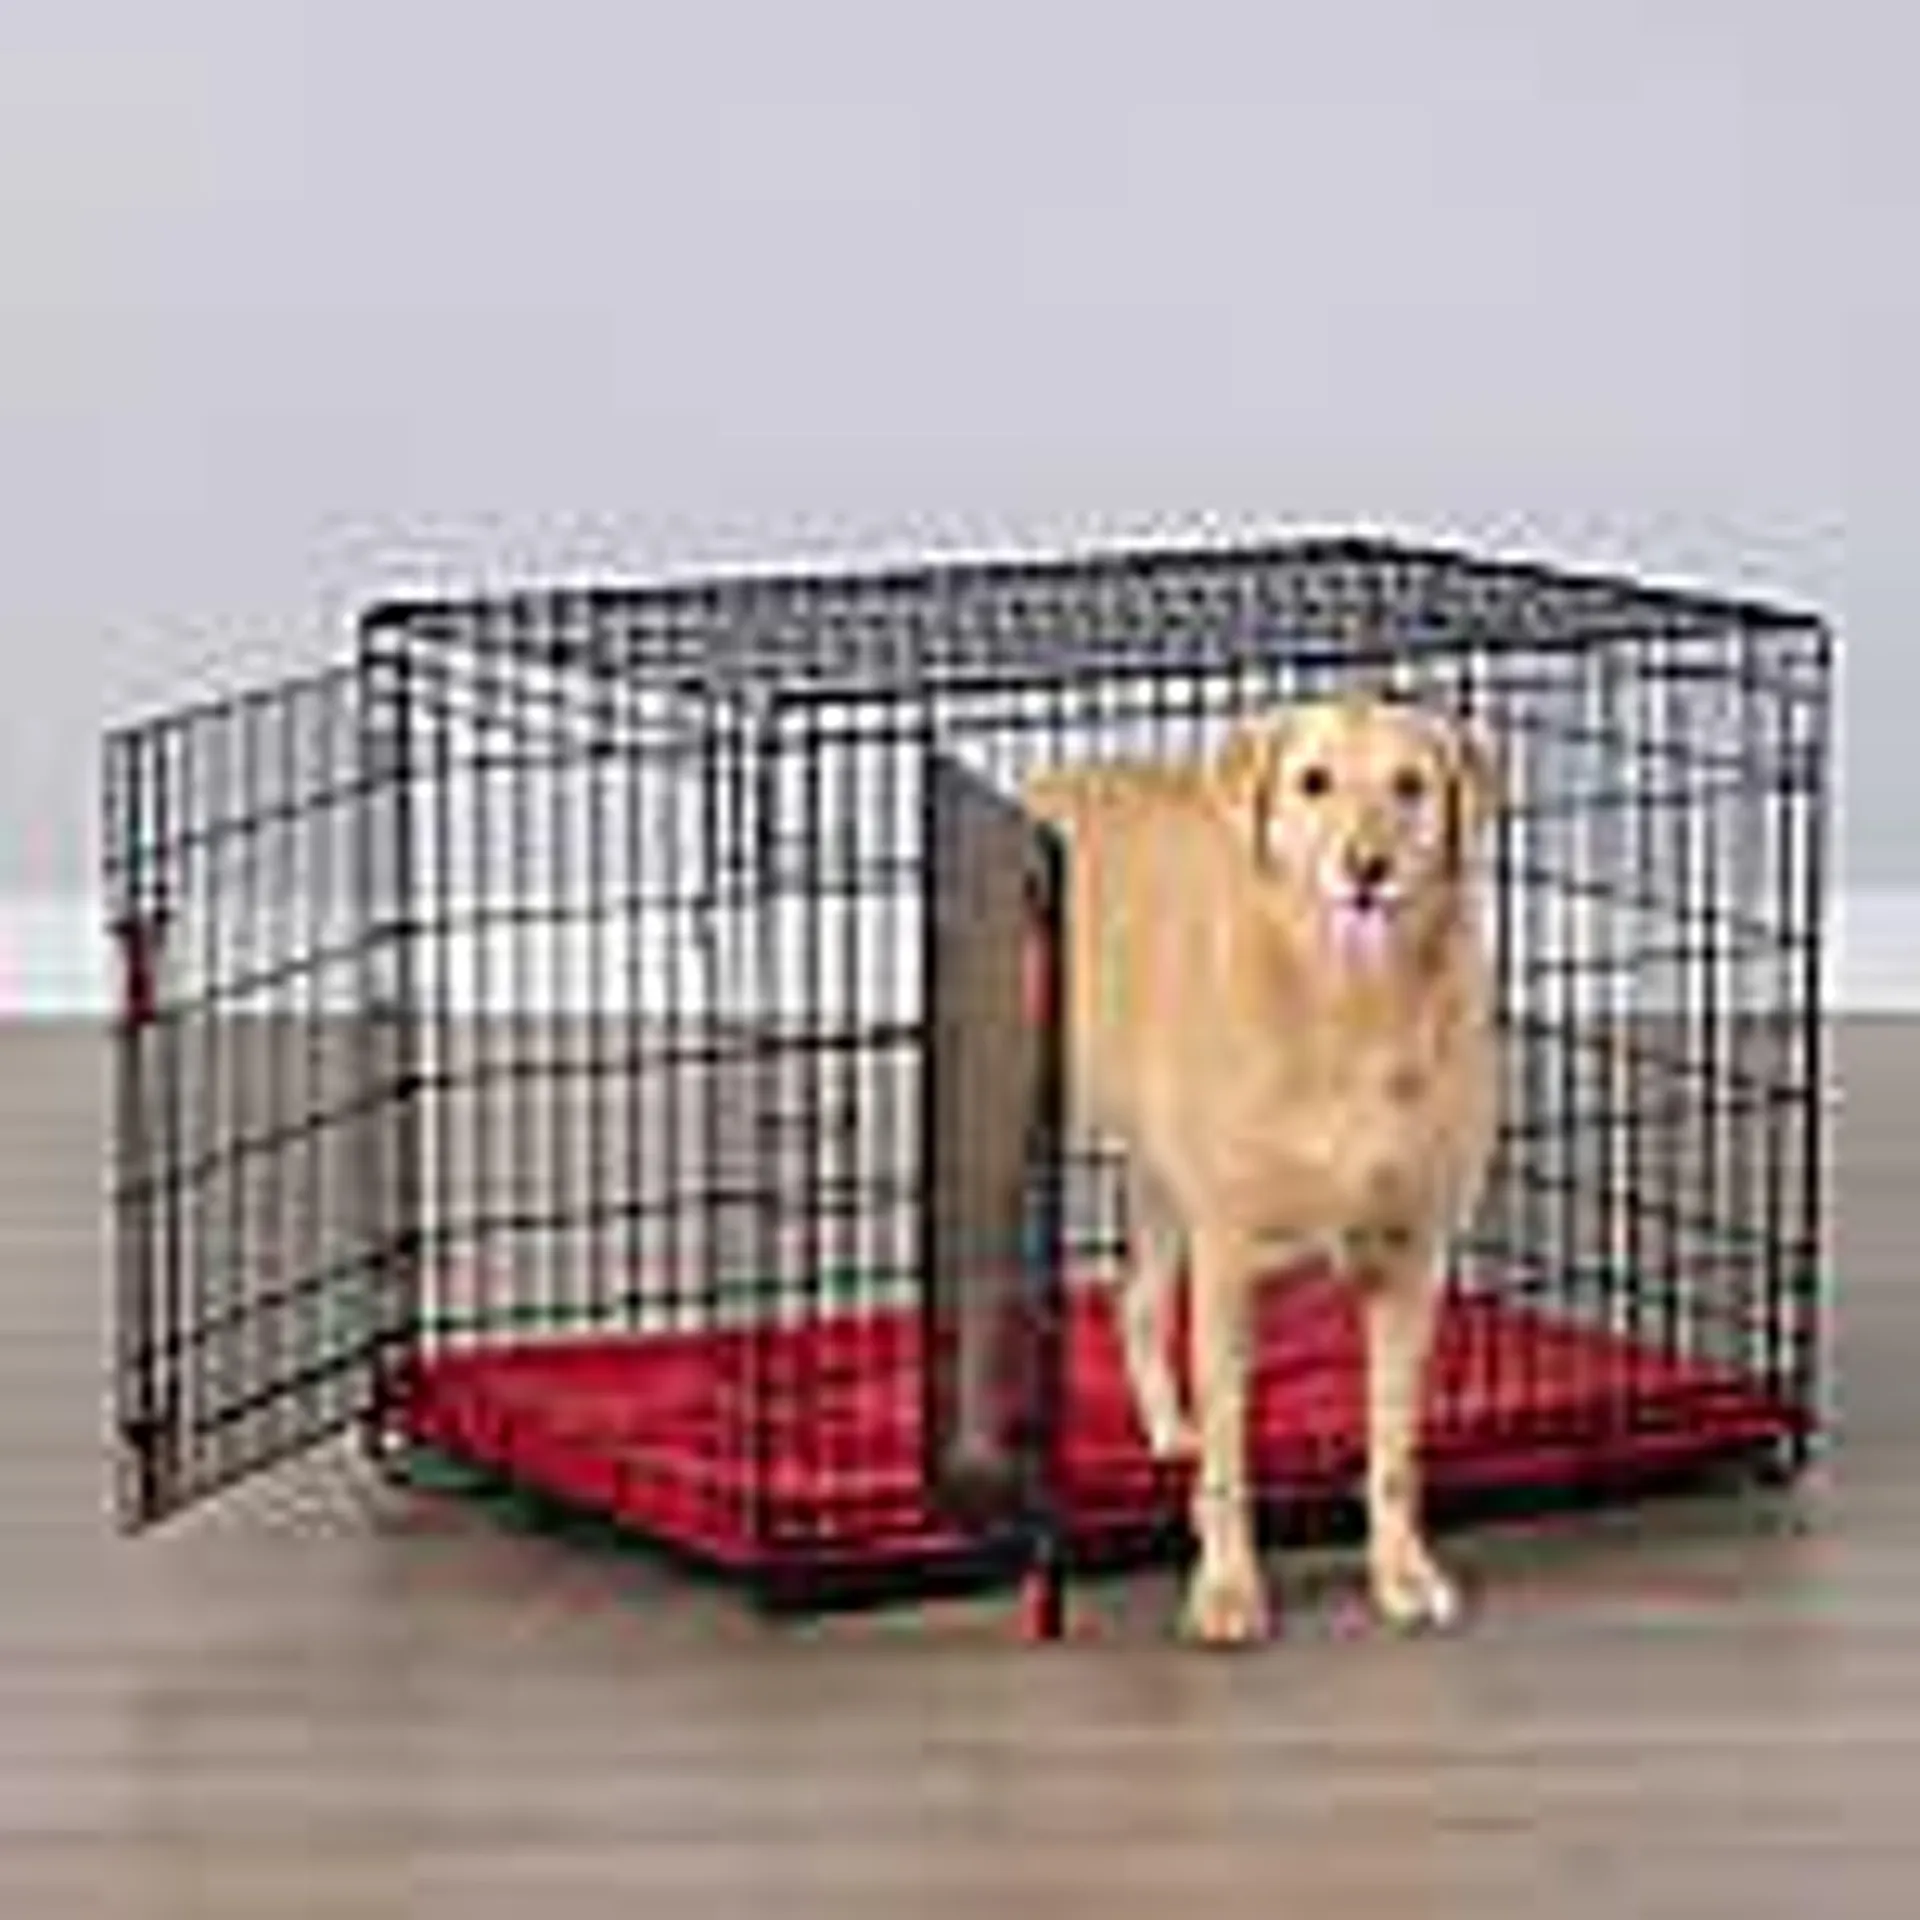 KONG Ultra-Strong Double Door Wire Dog Crate with Divider Panel